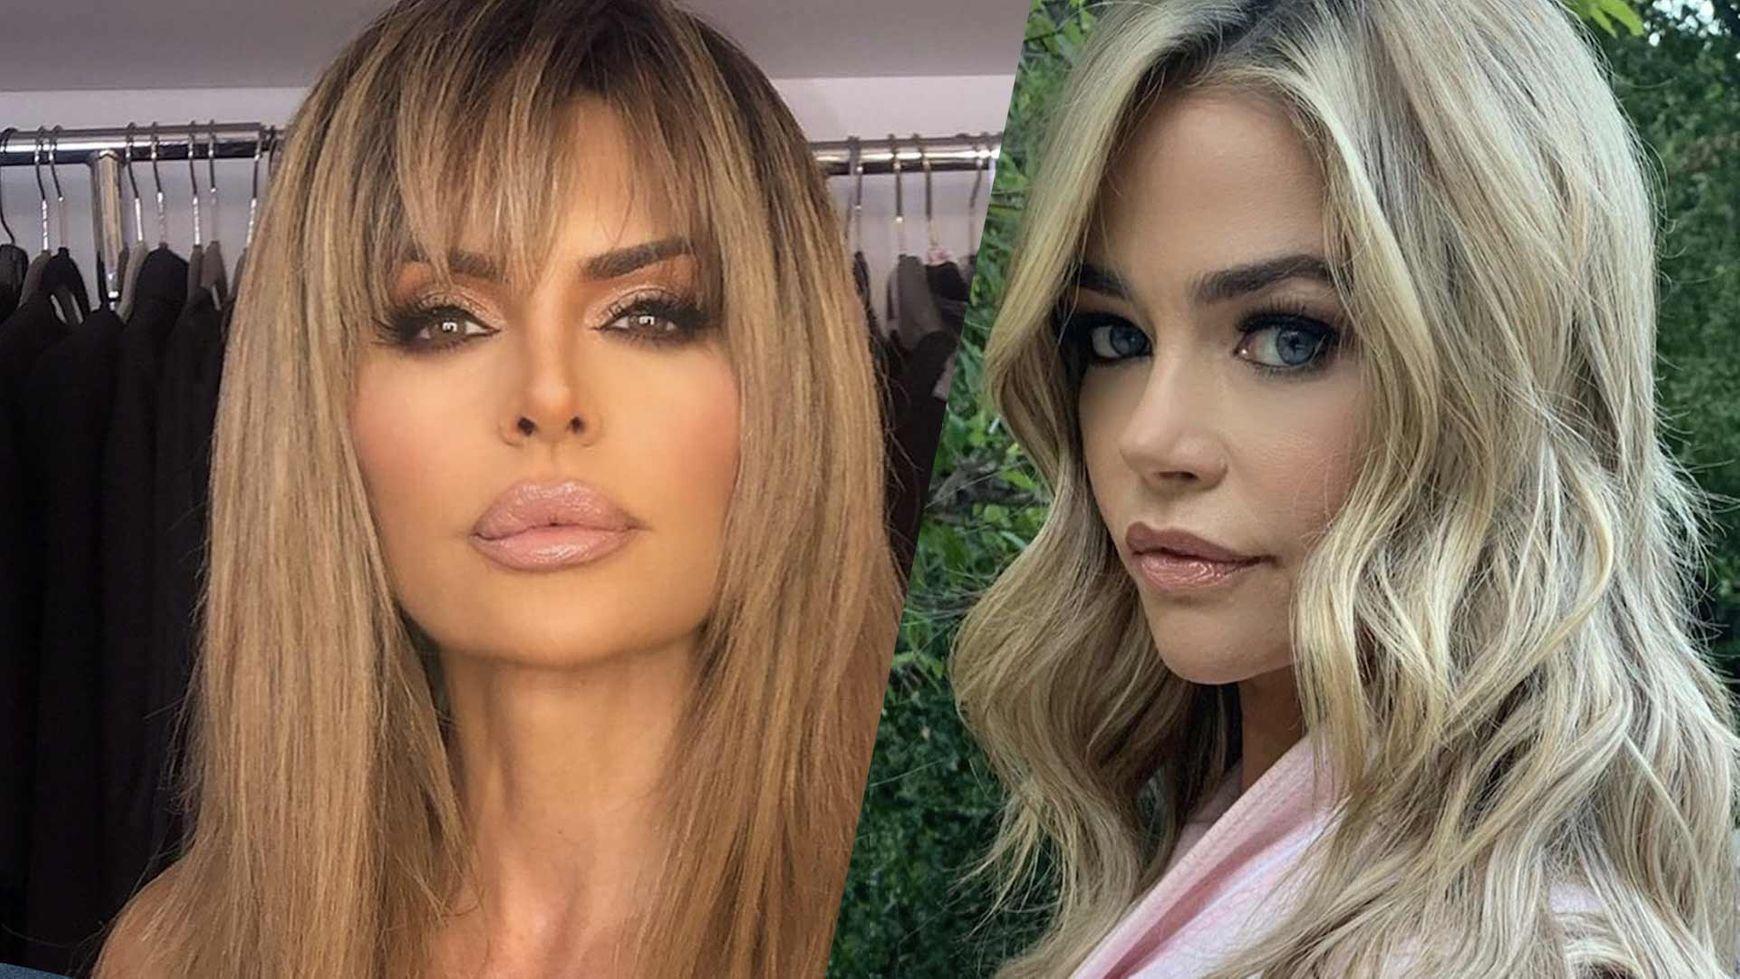 ‘RHOBH’ Lisa Rinna Takes Shot At Denise Richards With Lying ‘Friends’ Jab